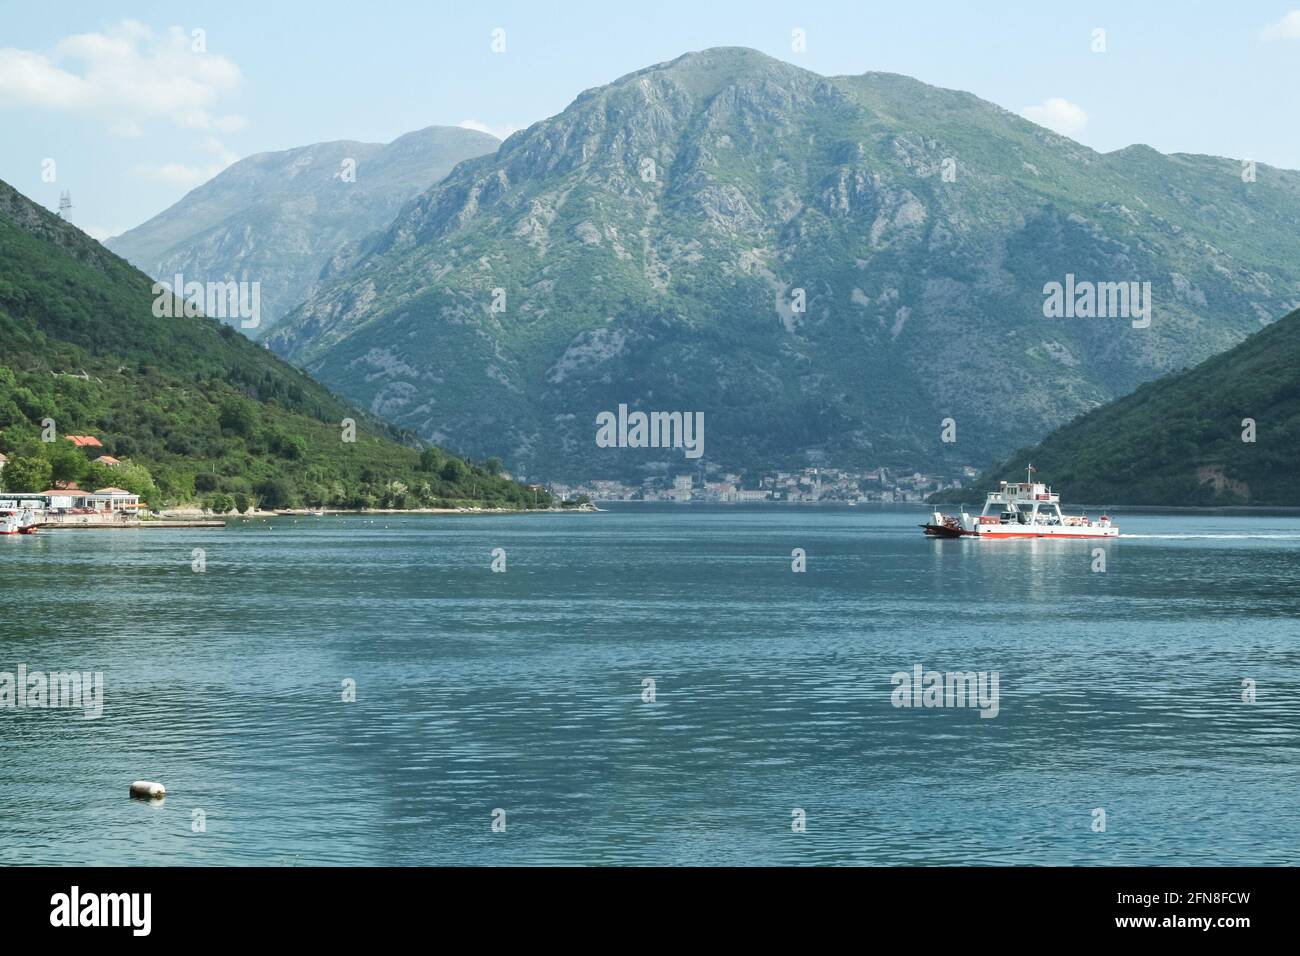 Picture of the bay of Kotor during a sunny afternoon,with a ferry boat in front of the mountains of Balkans. The Bay of Kotor is the name of the windi Stock Photo